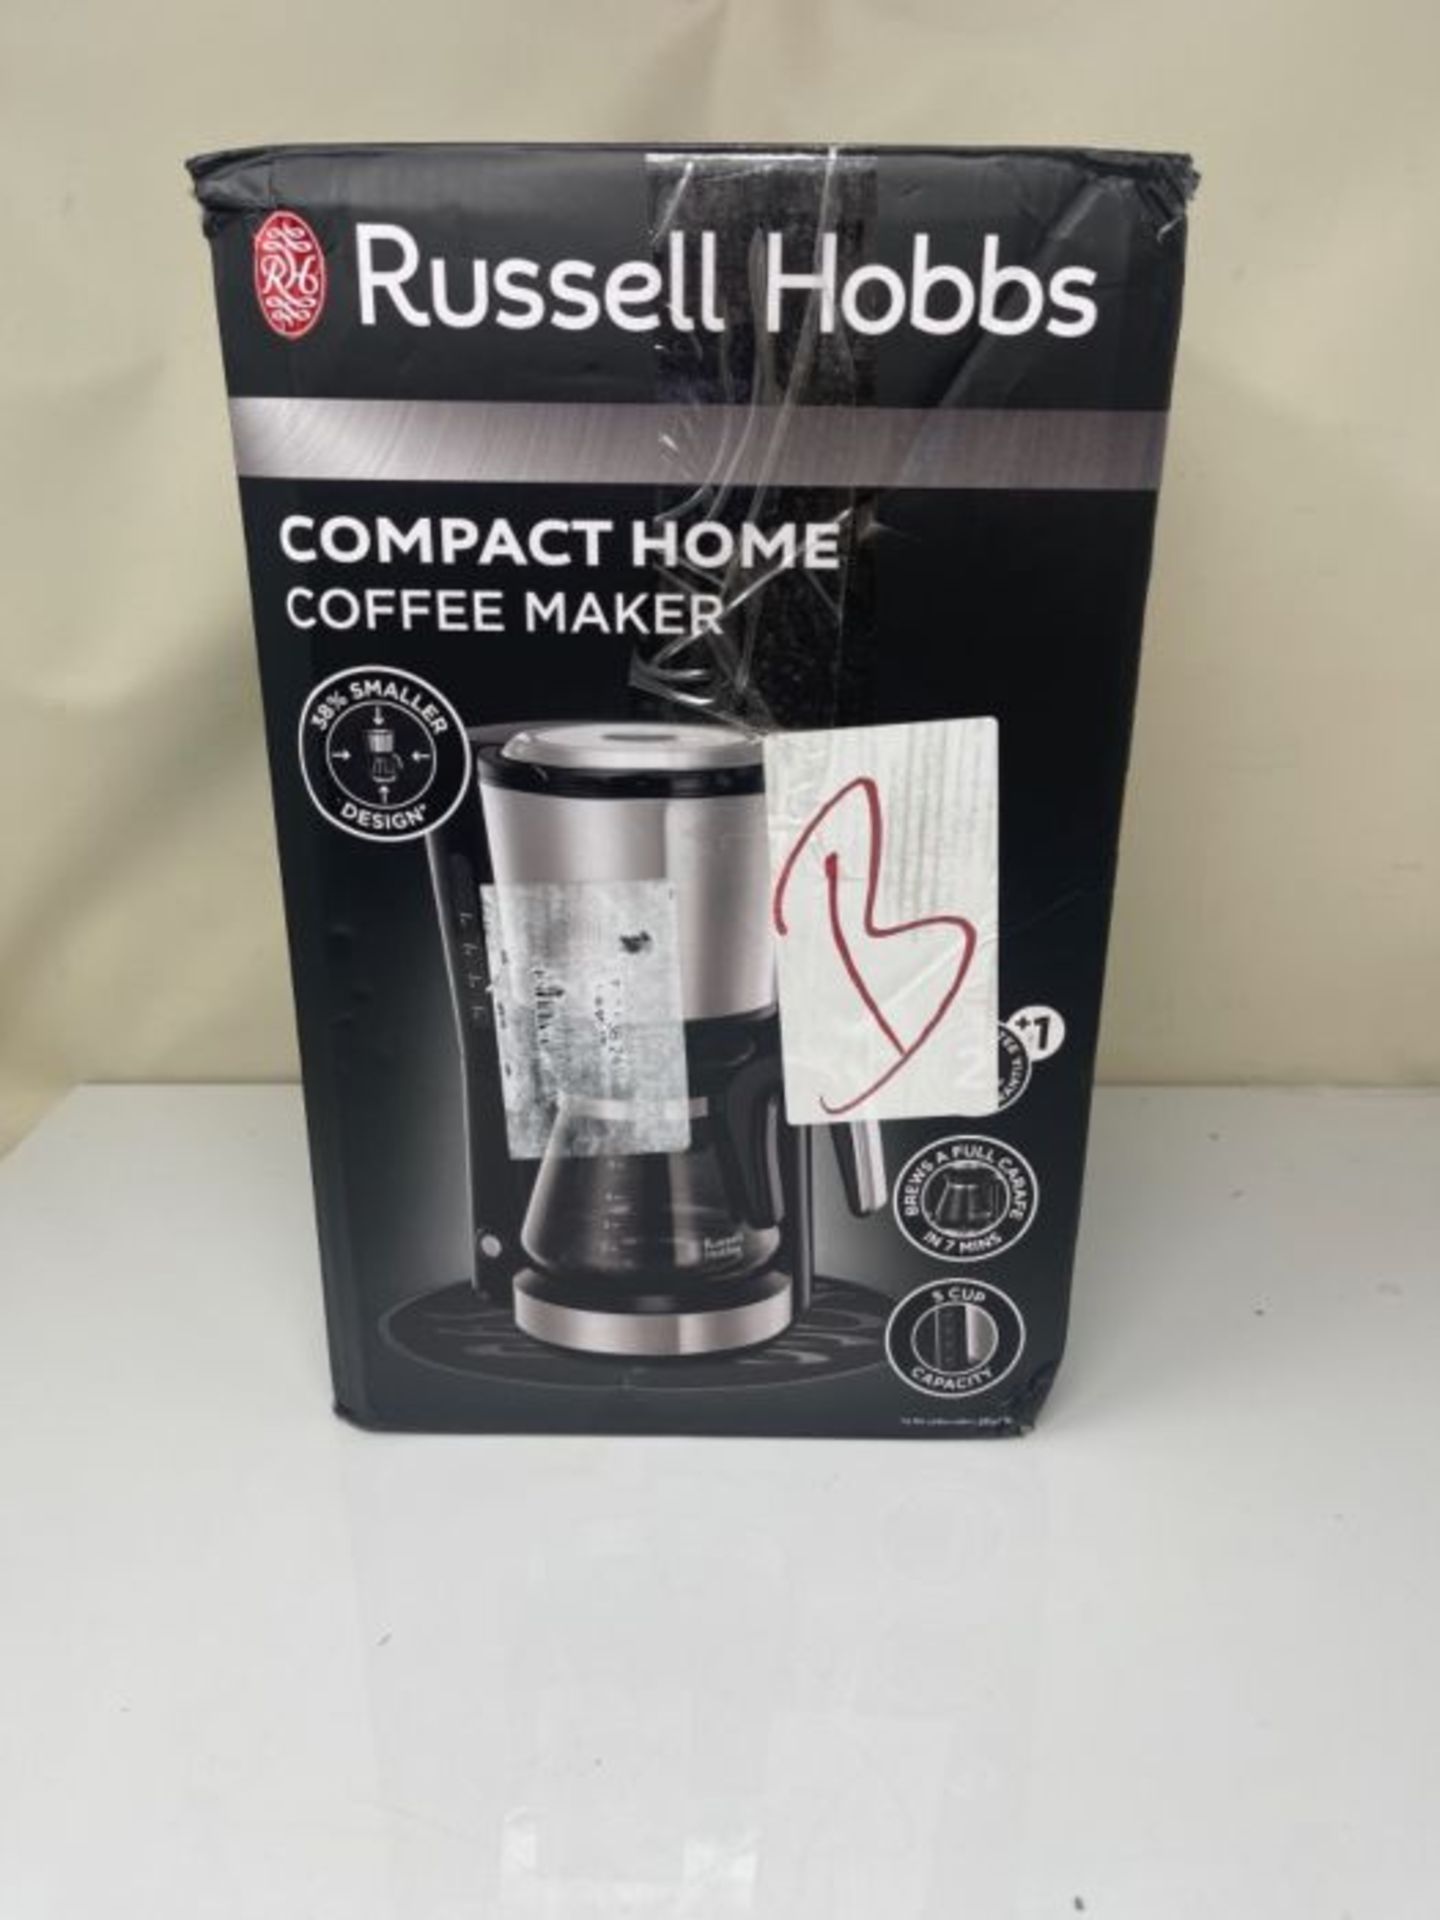 Russell Hobbs Compact Home 24210-56 Mini Glass Coffee Machine 0.625 L Space-Saving Des - Image 2 of 3